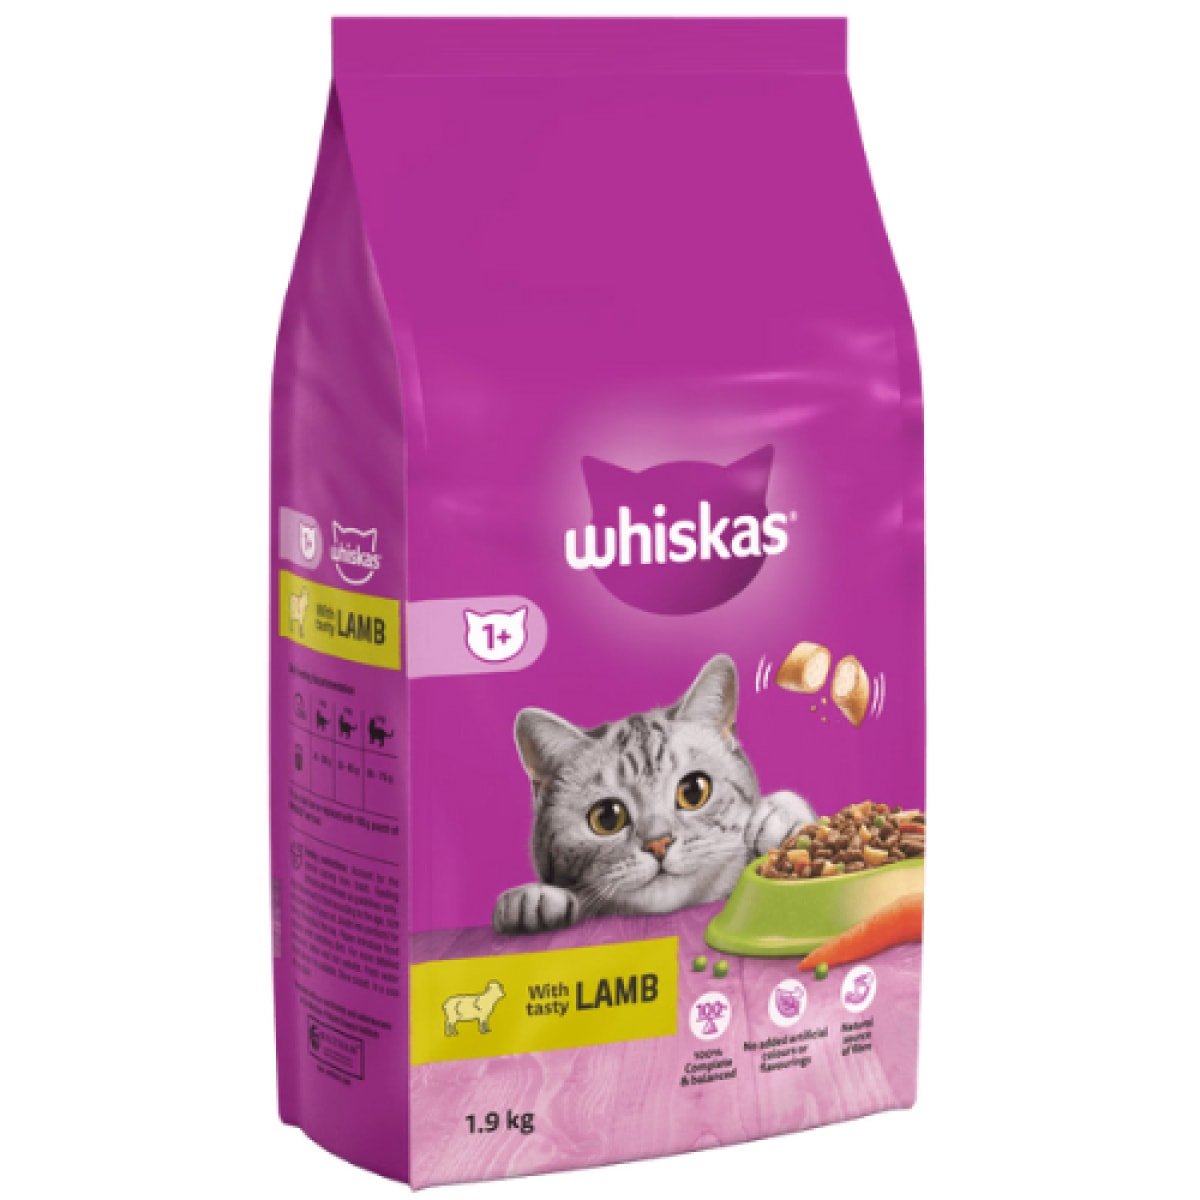 Whiskas Adult with Lamb Dry Food 1.9kg Main Image